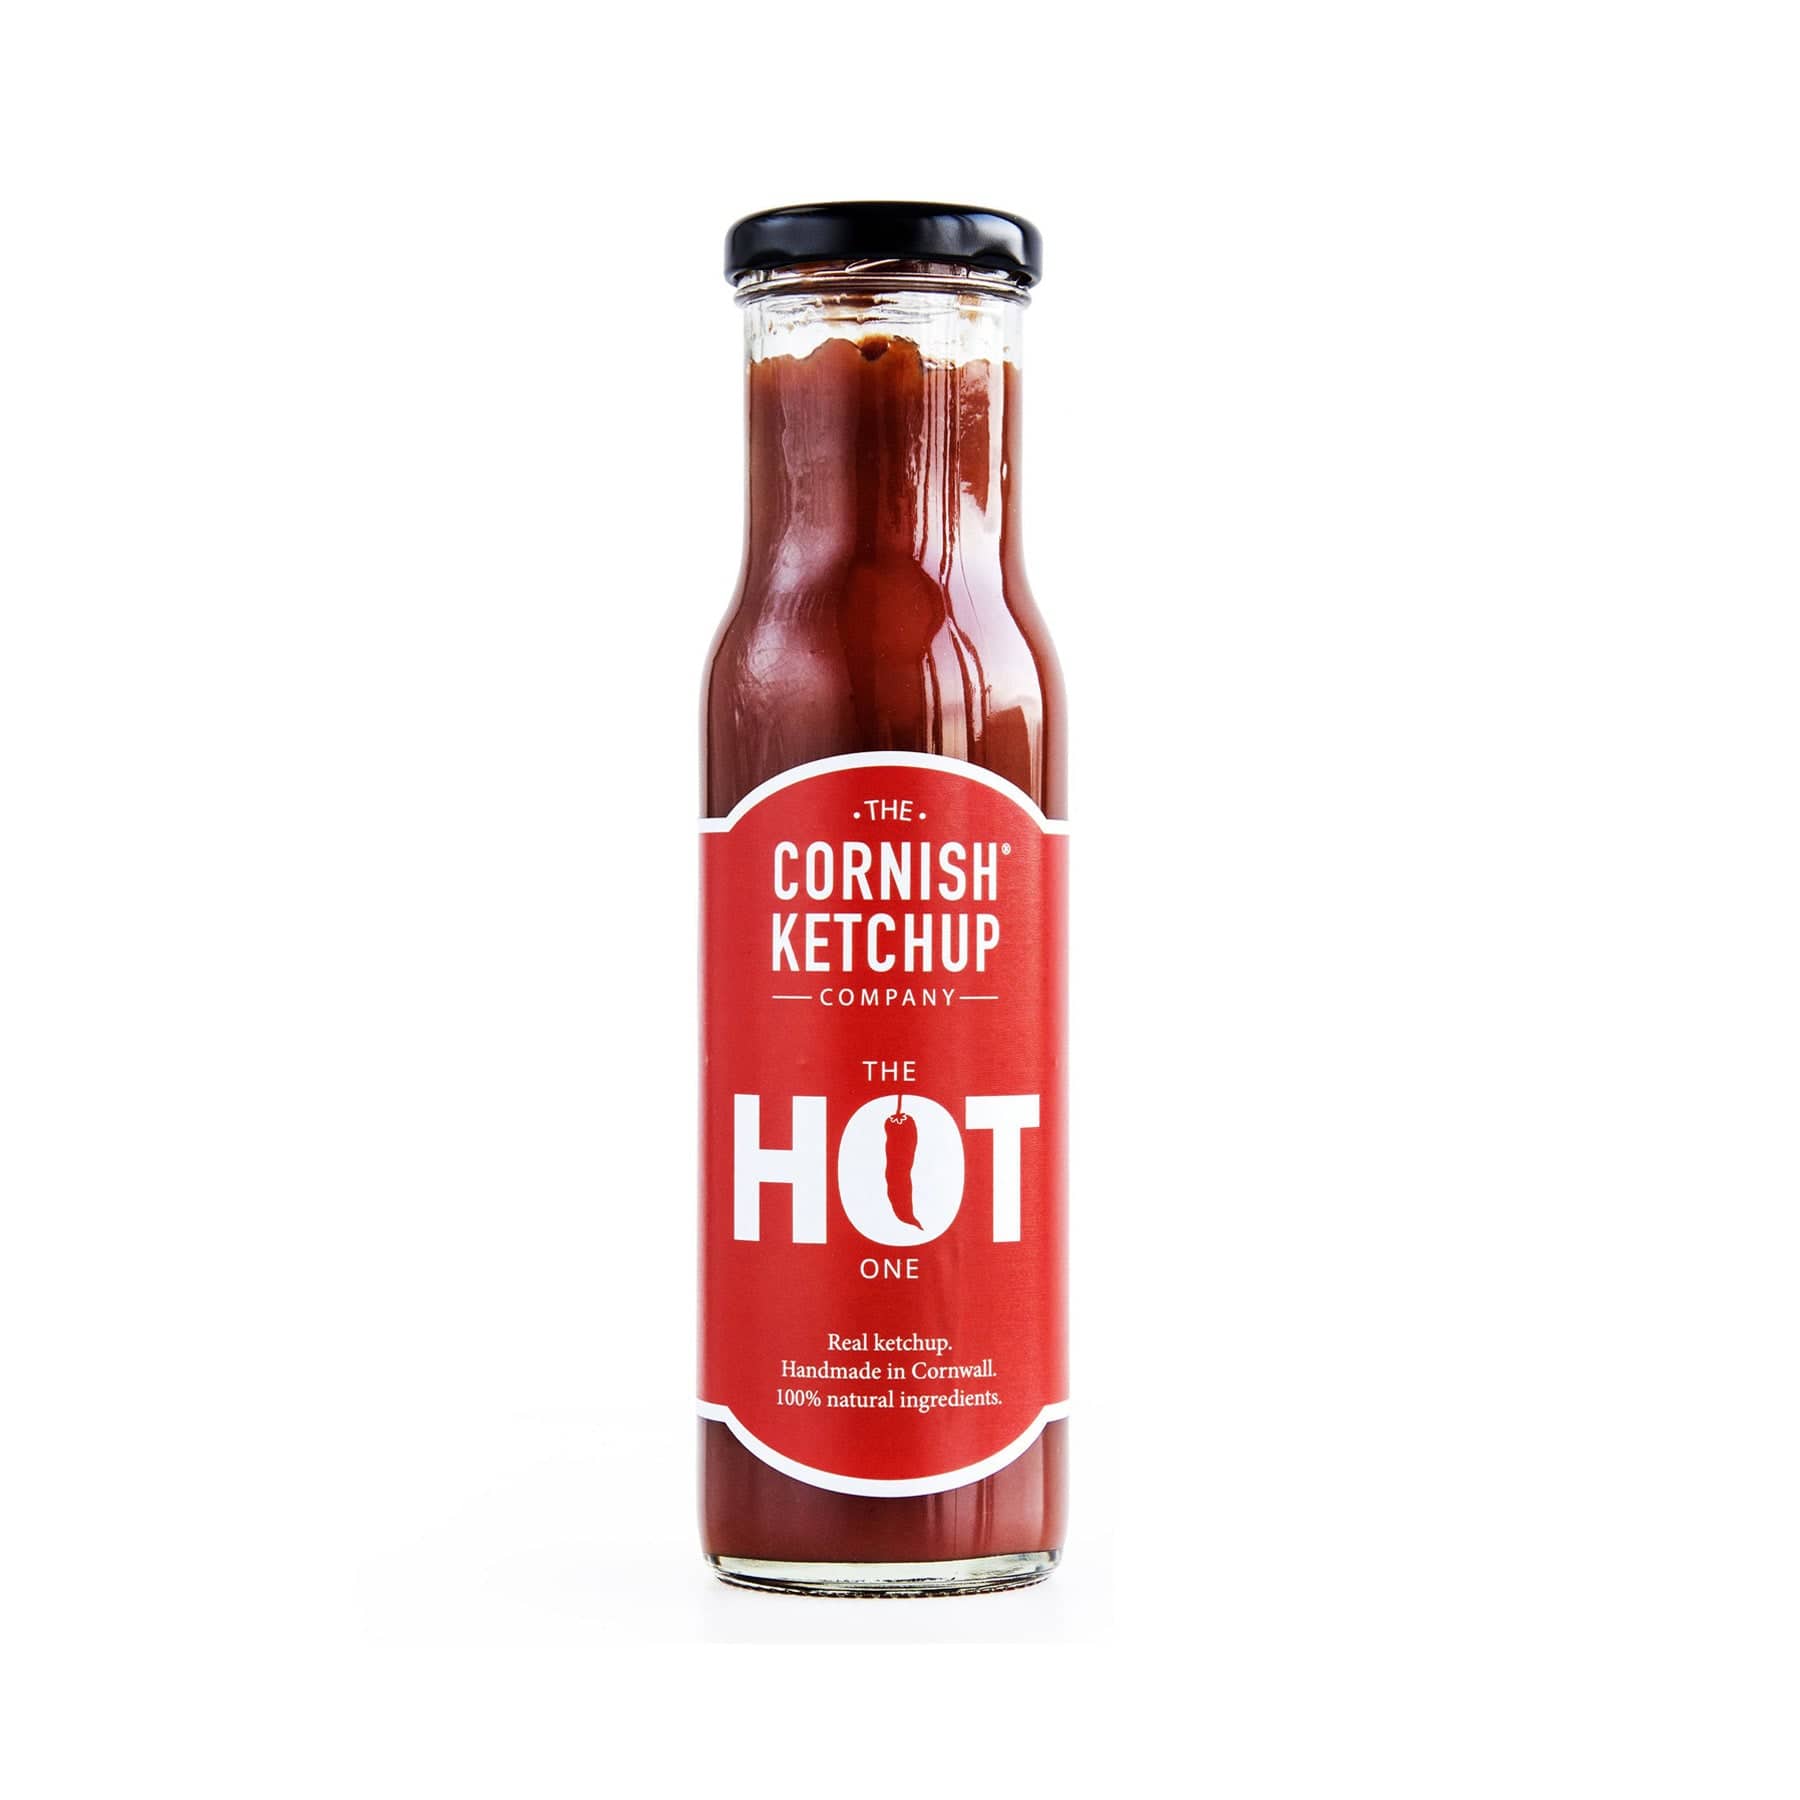 Cornish Ketchup Company hot ketchup bottle, handmade in Cornwall, 100% natural ingredients, isolated on white background.